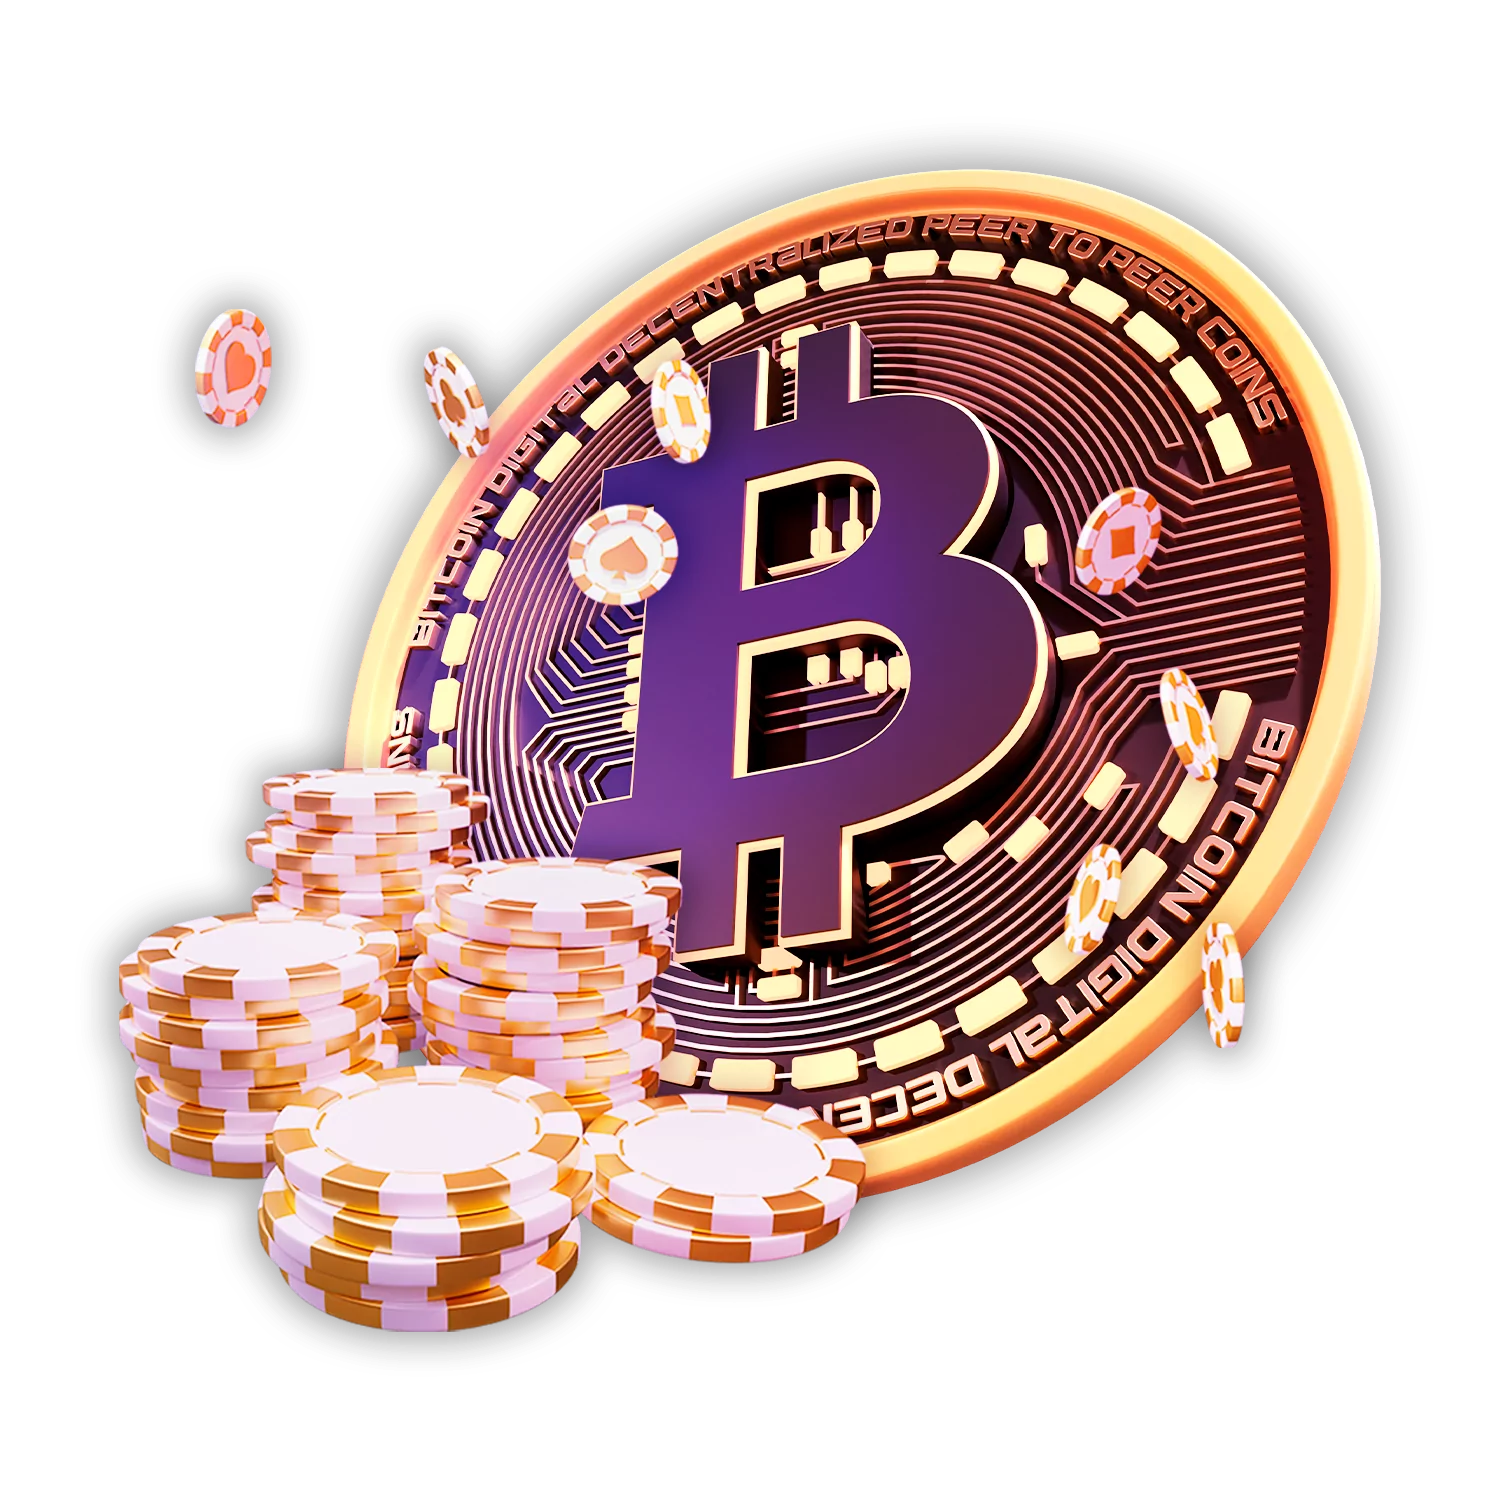 Learn from this article how to transfer money to or from casino accounts with the help of cryptocurrencies.